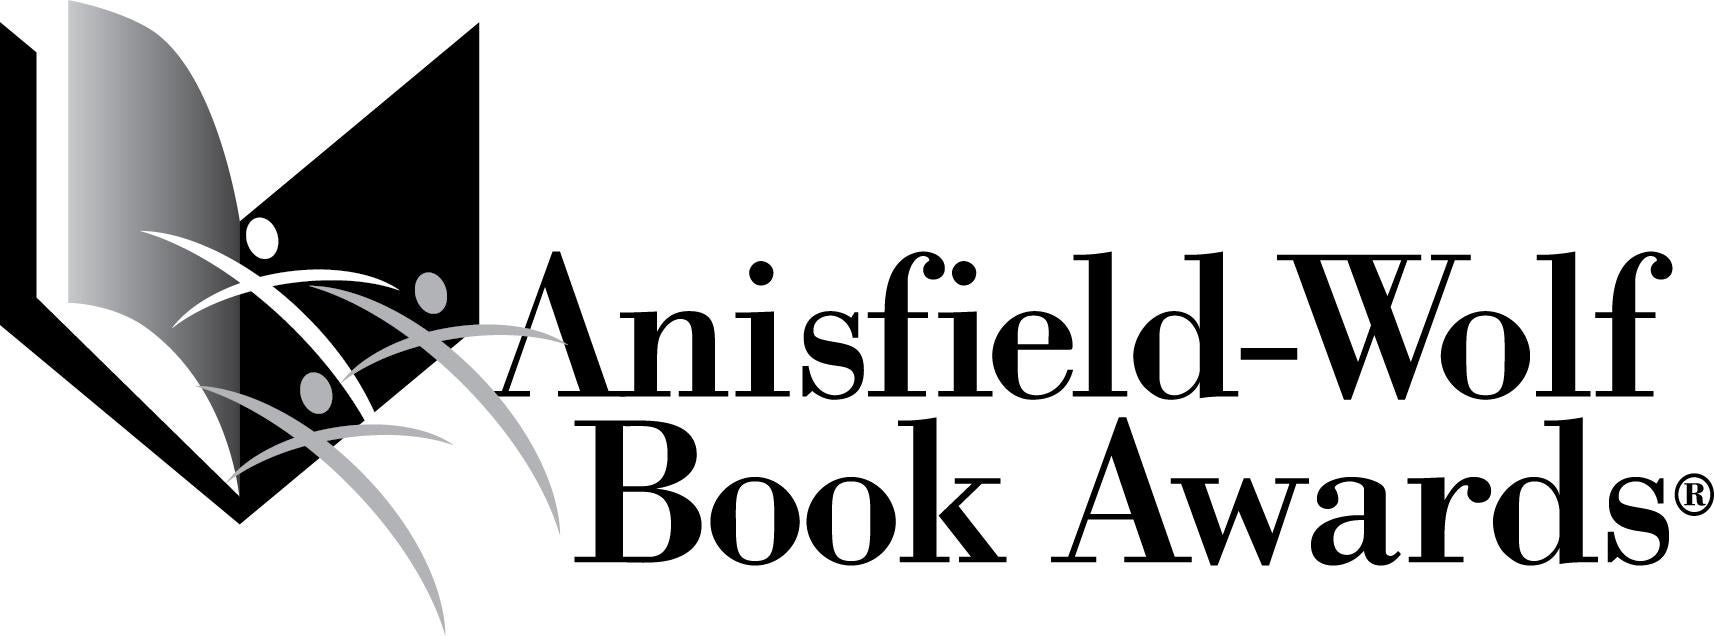 "Anisfield-Wolf Book Awards" logo with an open book